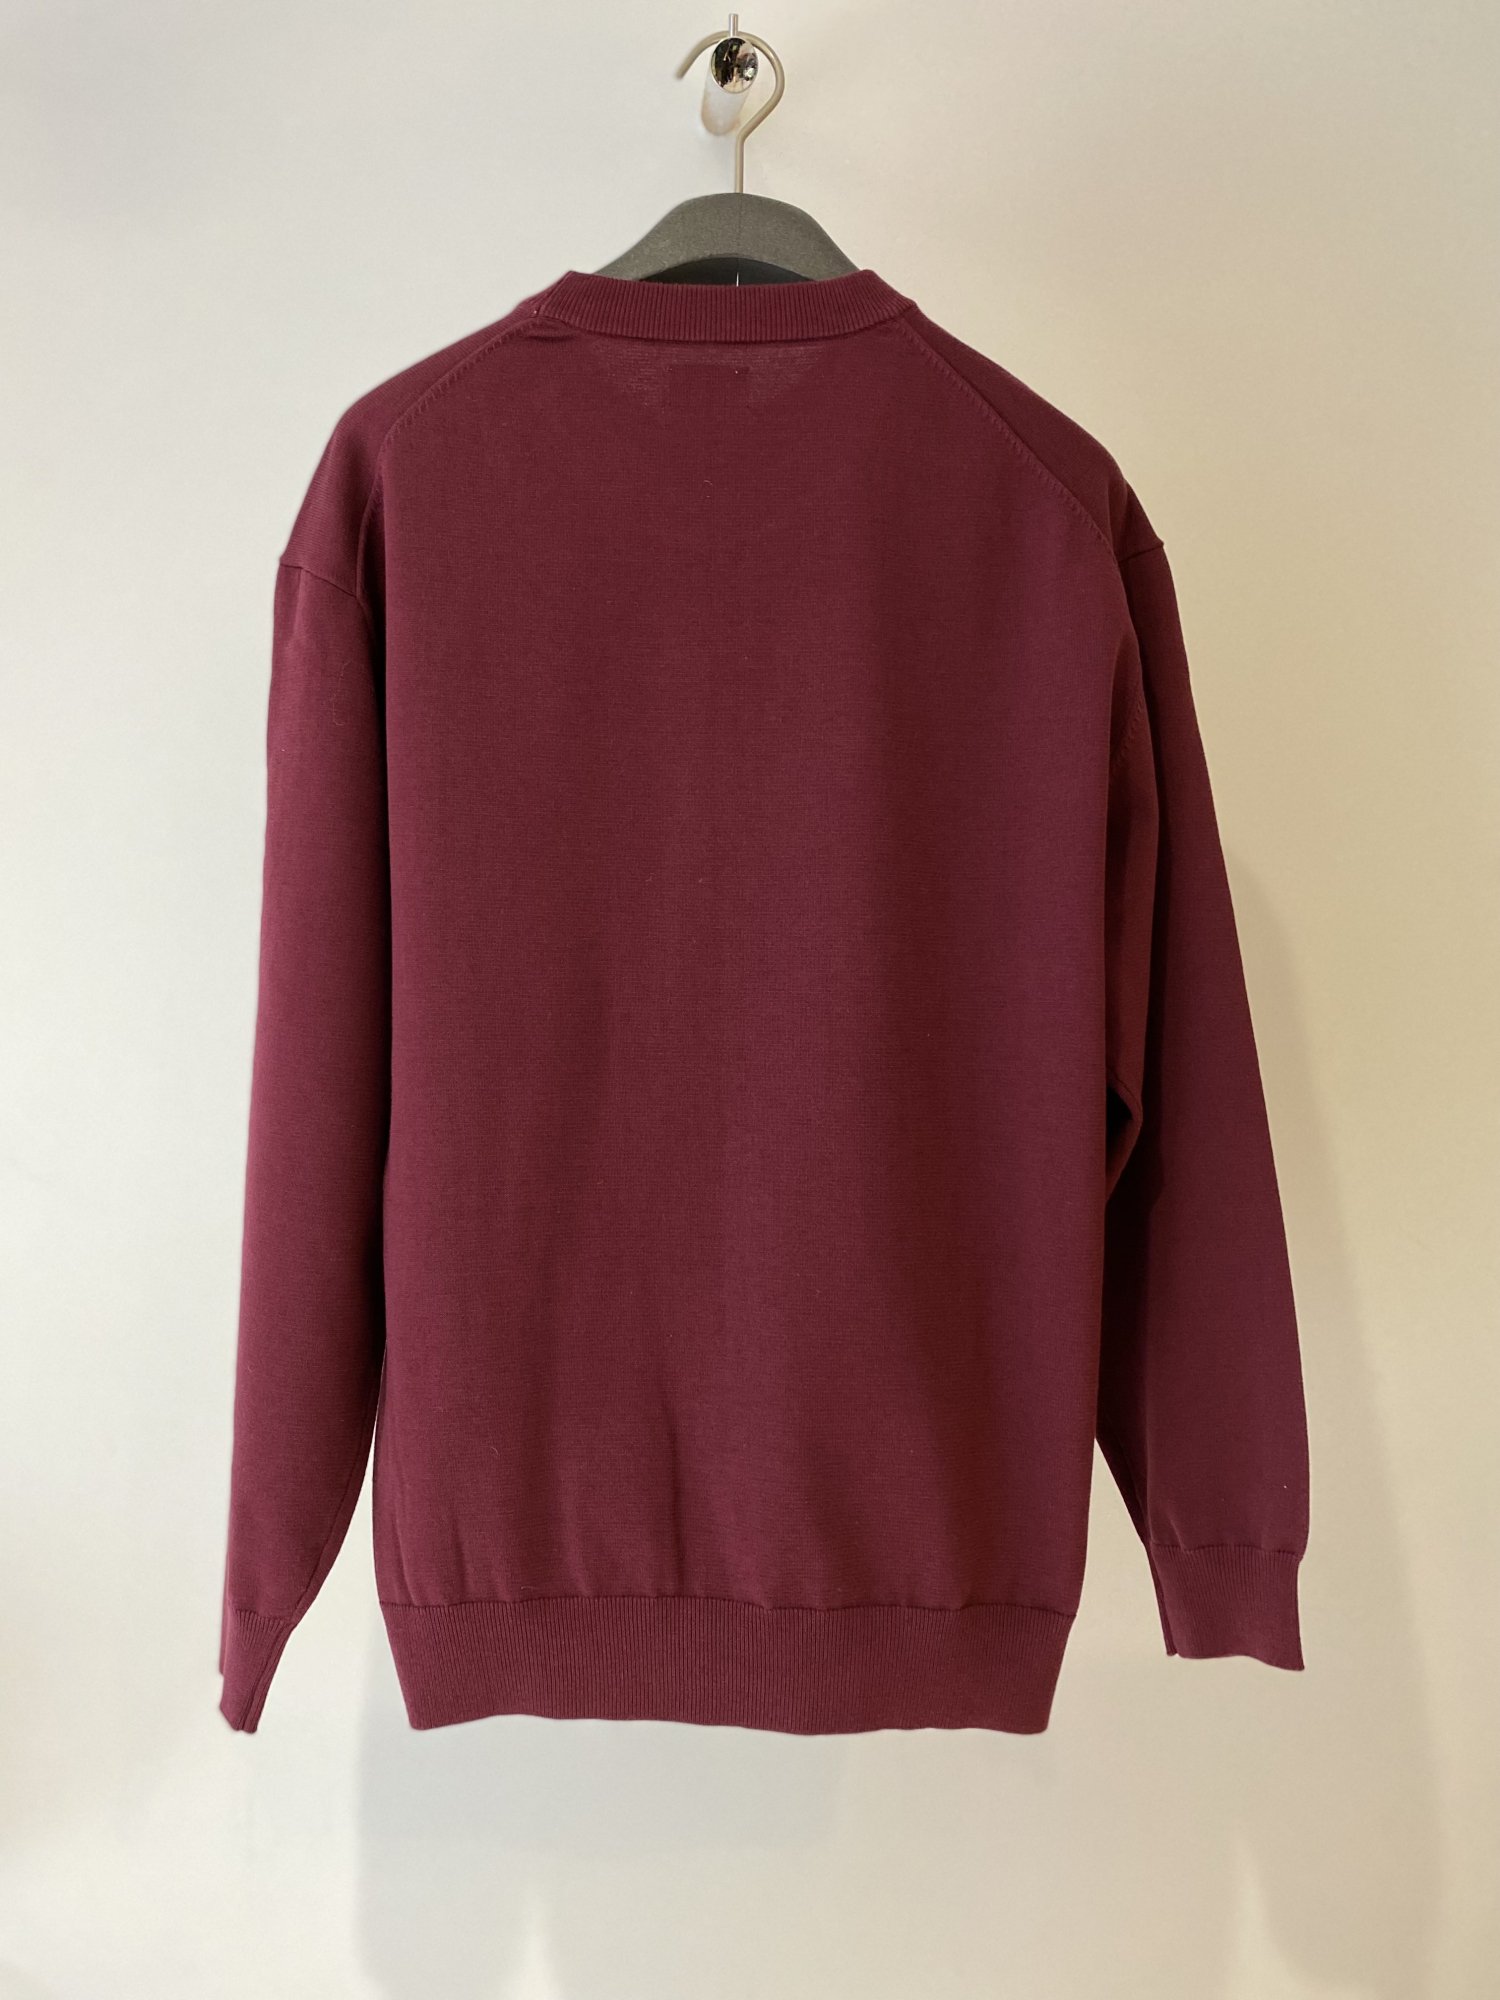 BLUFCAMP<br />Printed Cotton Sweater / Burgundy <img class='new_mark_img2' src='https://img.shop-pro.jp/img/new/icons14.gif' style='border:none;display:inline;margin:0px;padding:0px;width:auto;' />